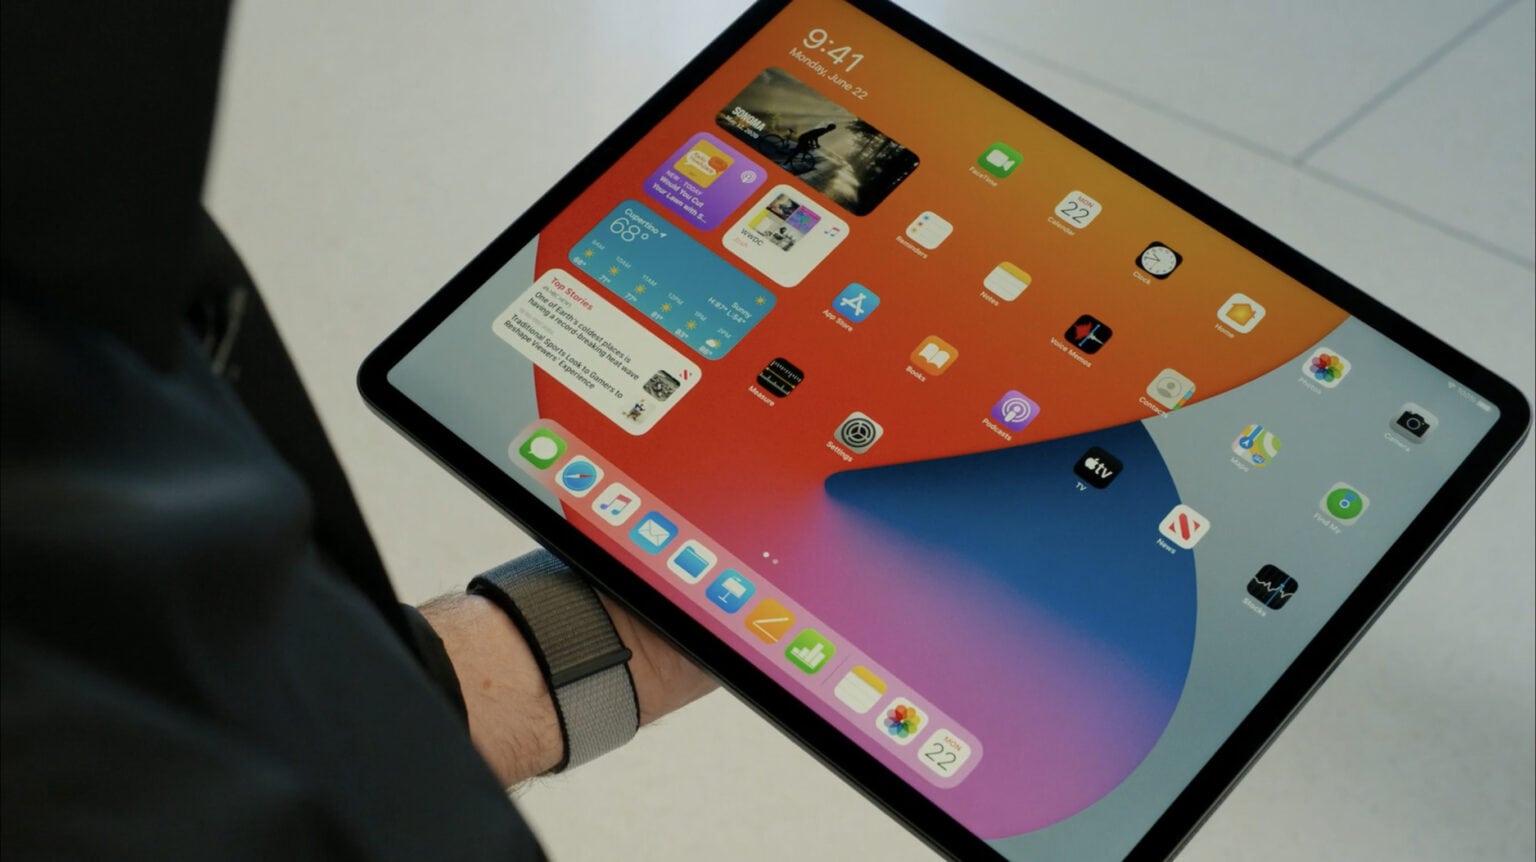 iPadOS 14 Home screen widgets aren’t nearly as flexible as they are in iOS 14